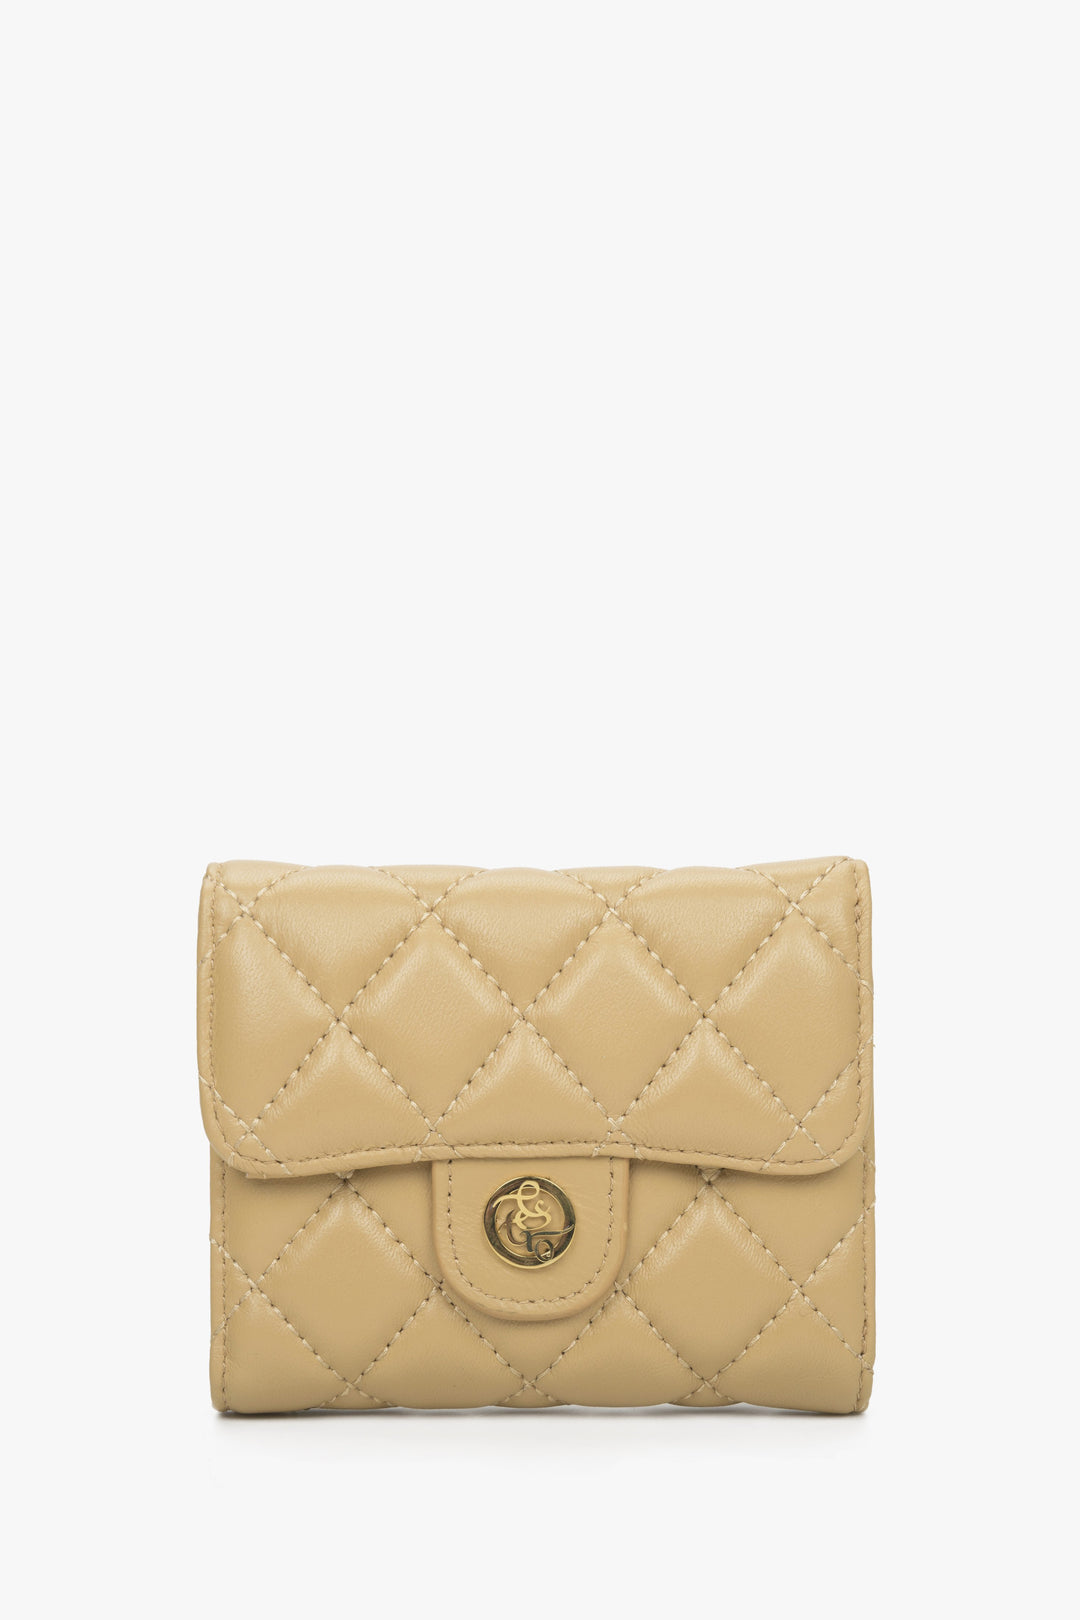 Women's Tri-Fold Small Beige Wallet with Decorative Embossing Estro ER00114477.